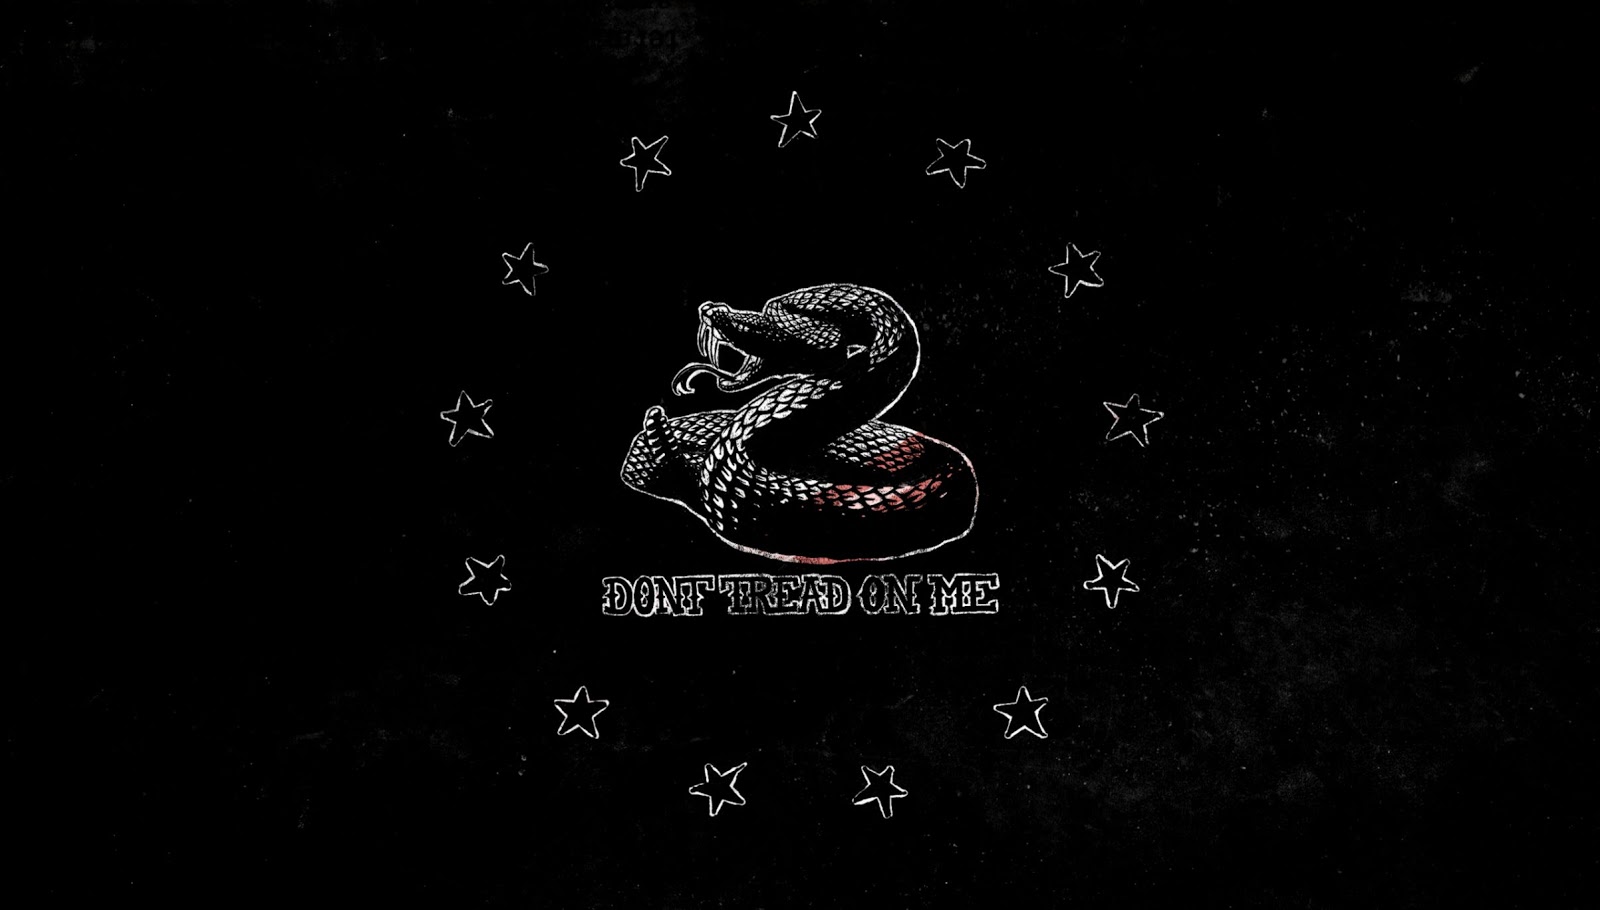 Dont tread on me wallpaper